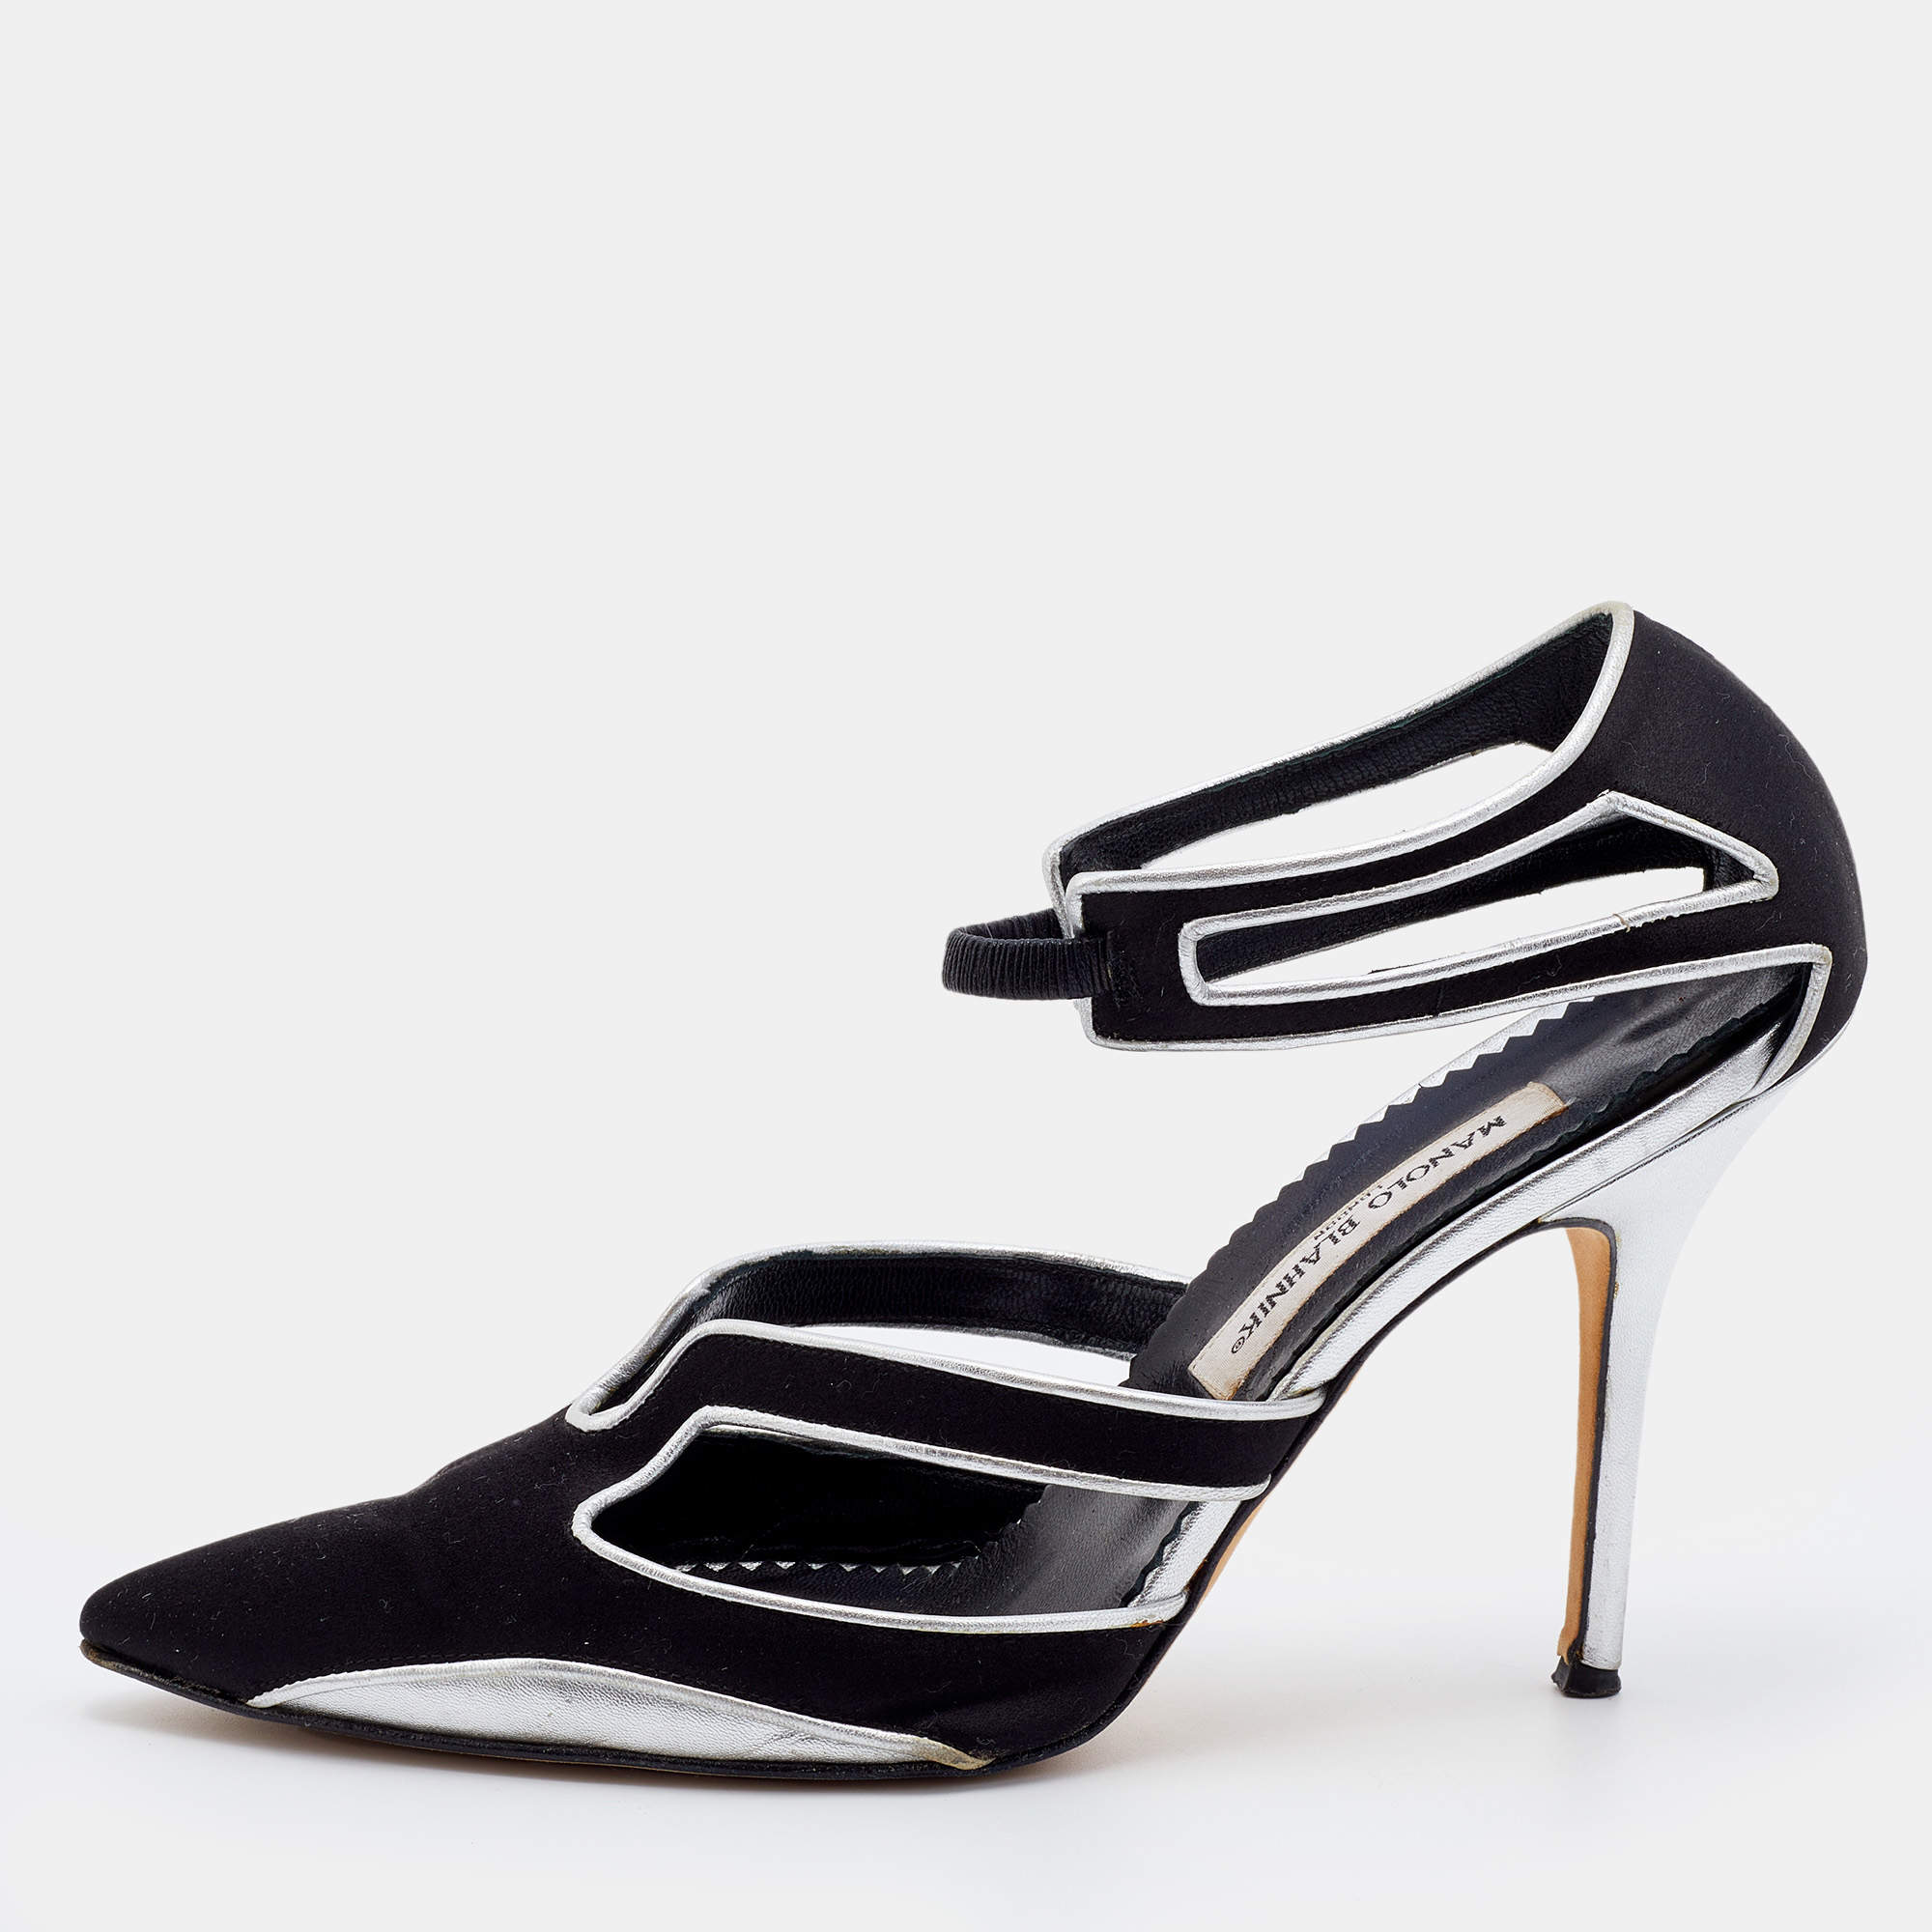 Manolo Blahnik Black/Silver Satin And Leather Cut Out Pumps Size 40.5 ...